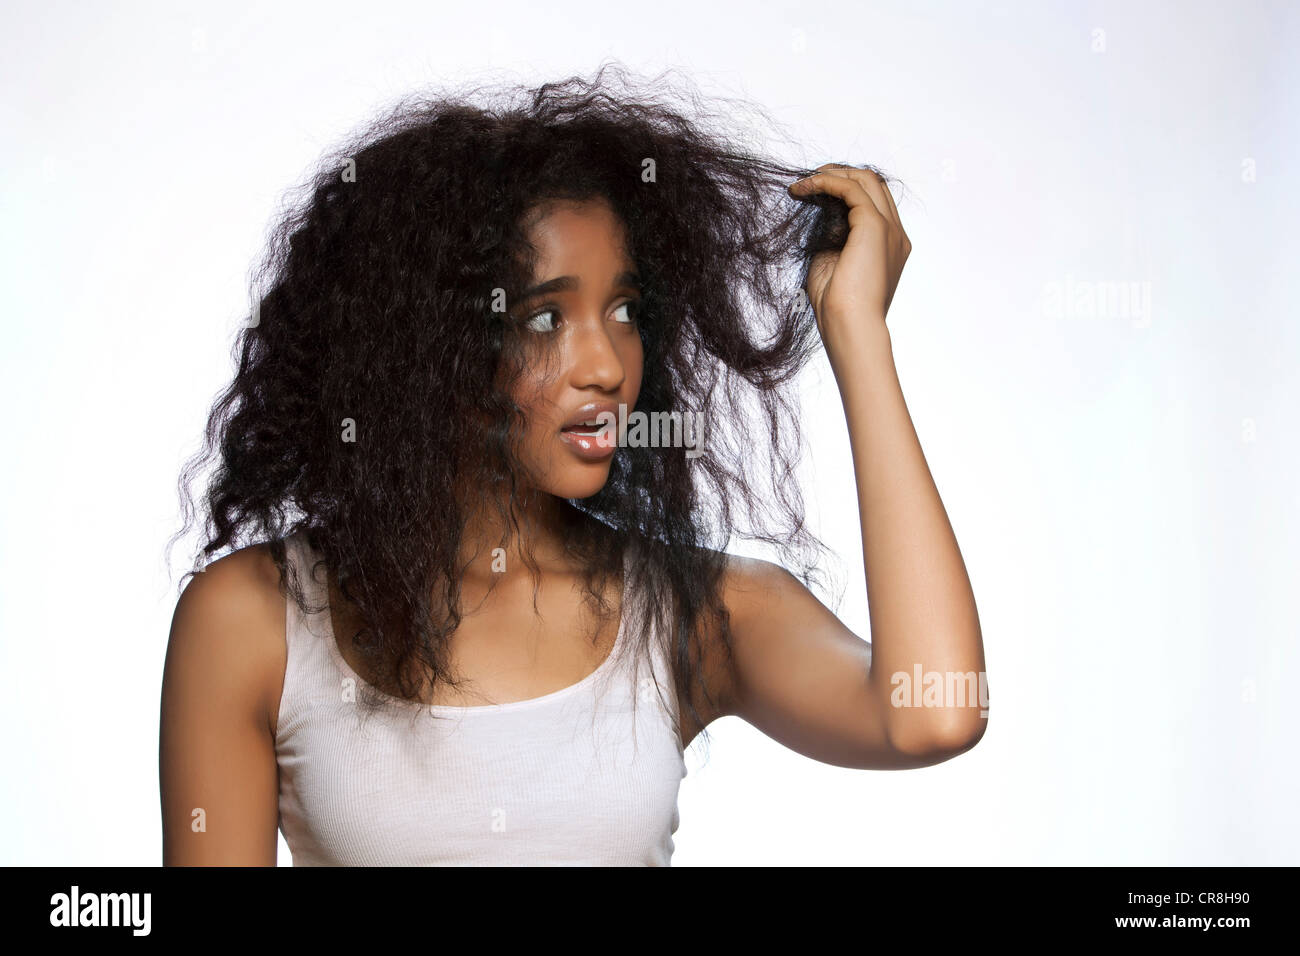 https://c8.alamy.com/comp/CR8H90/young-woman-holding-hair-against-white-background-CR8H90.jpg